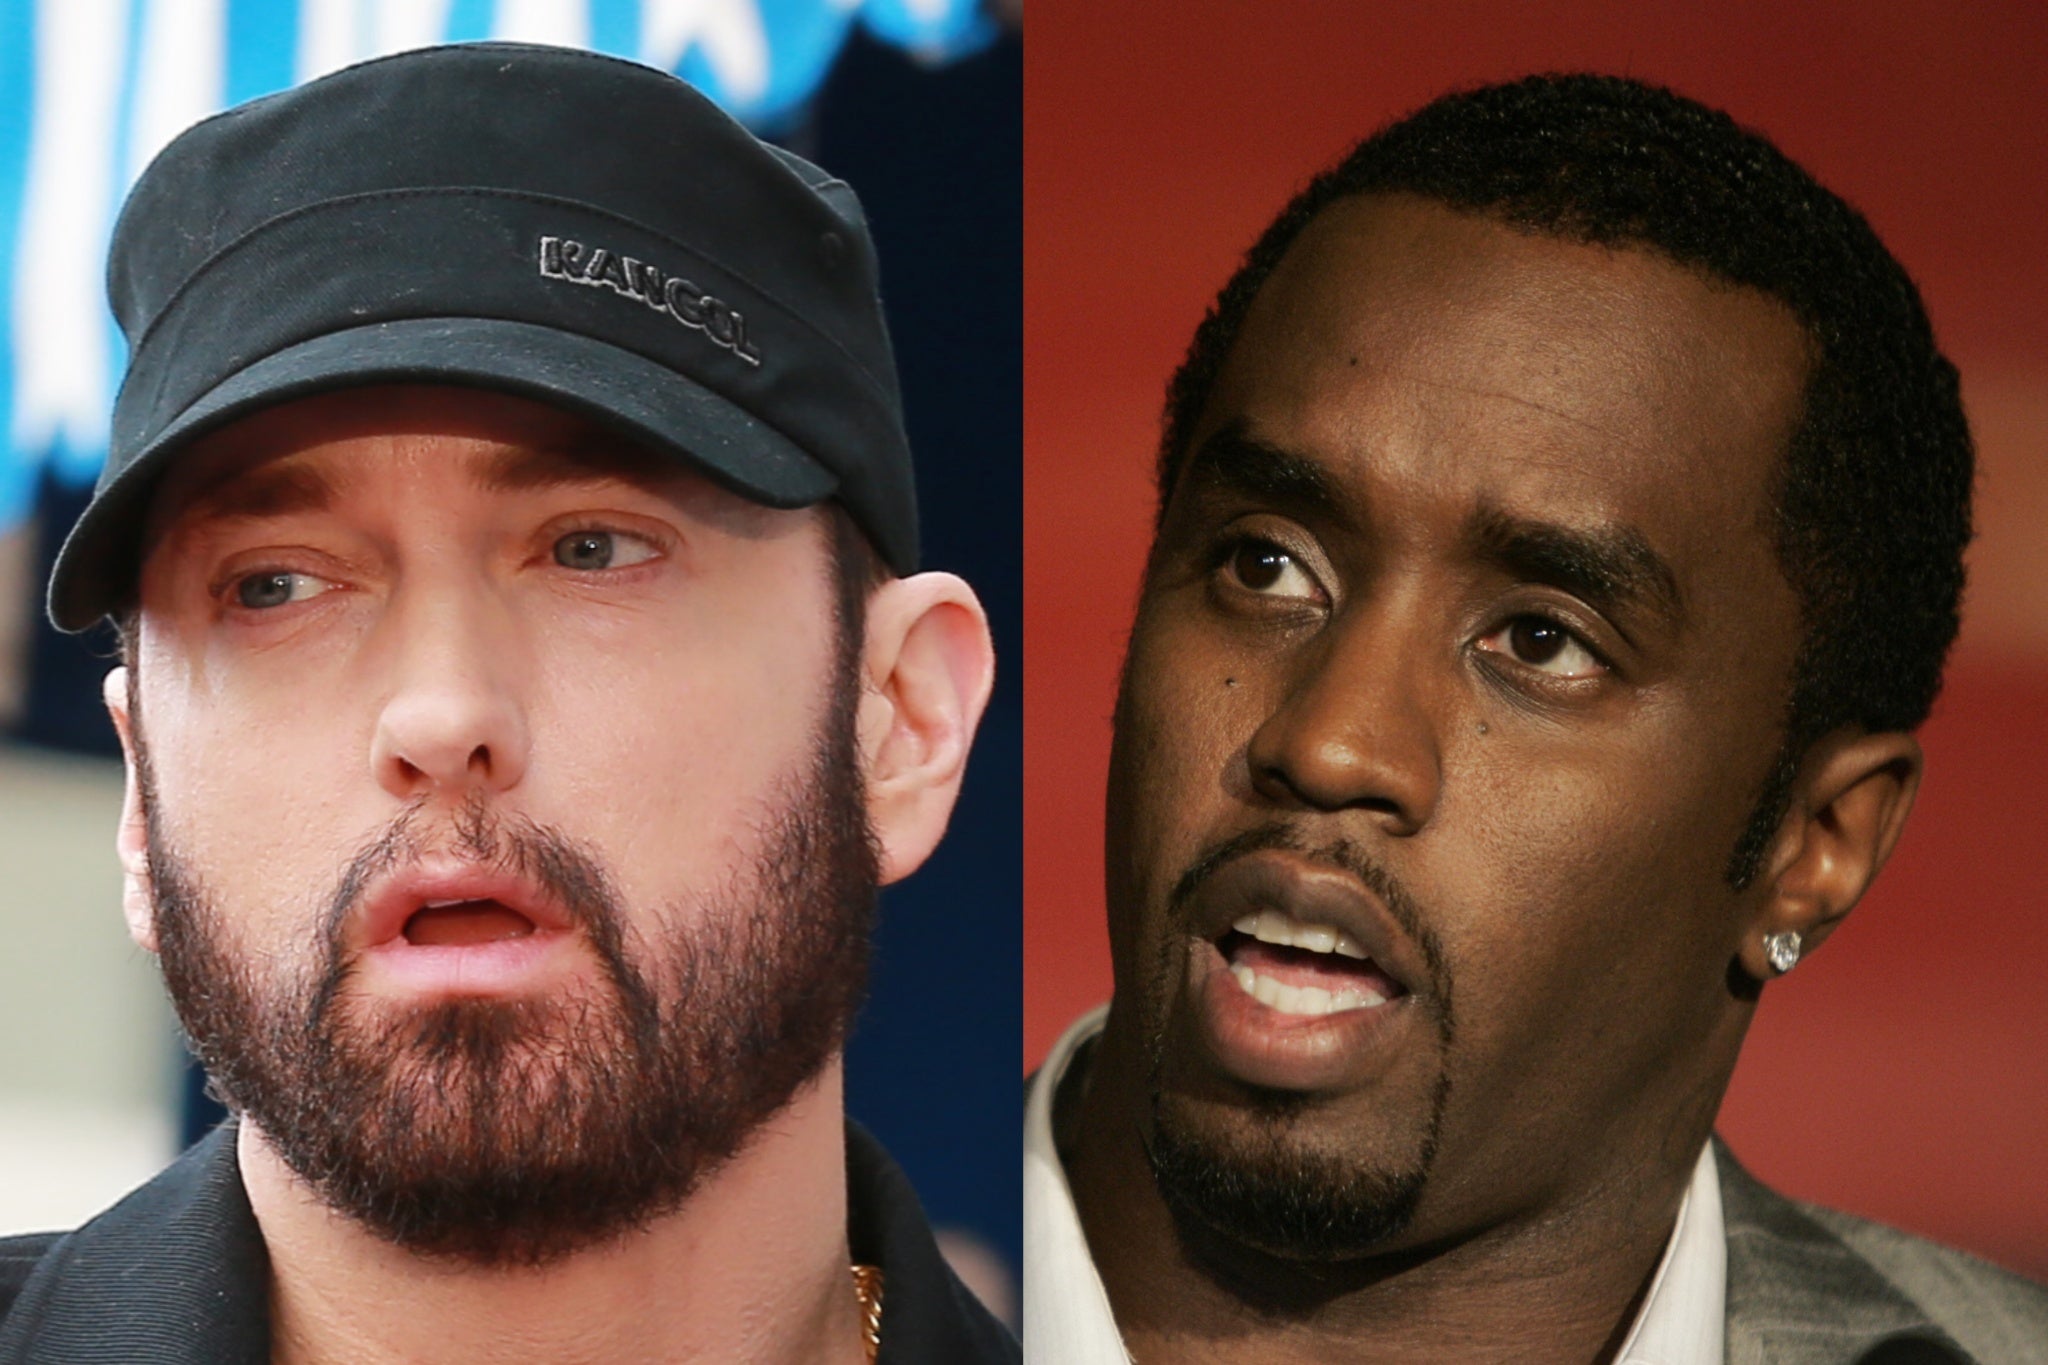 Marshall ‘Eminem’ Mathers and Sean ‘Diddy’ Combs